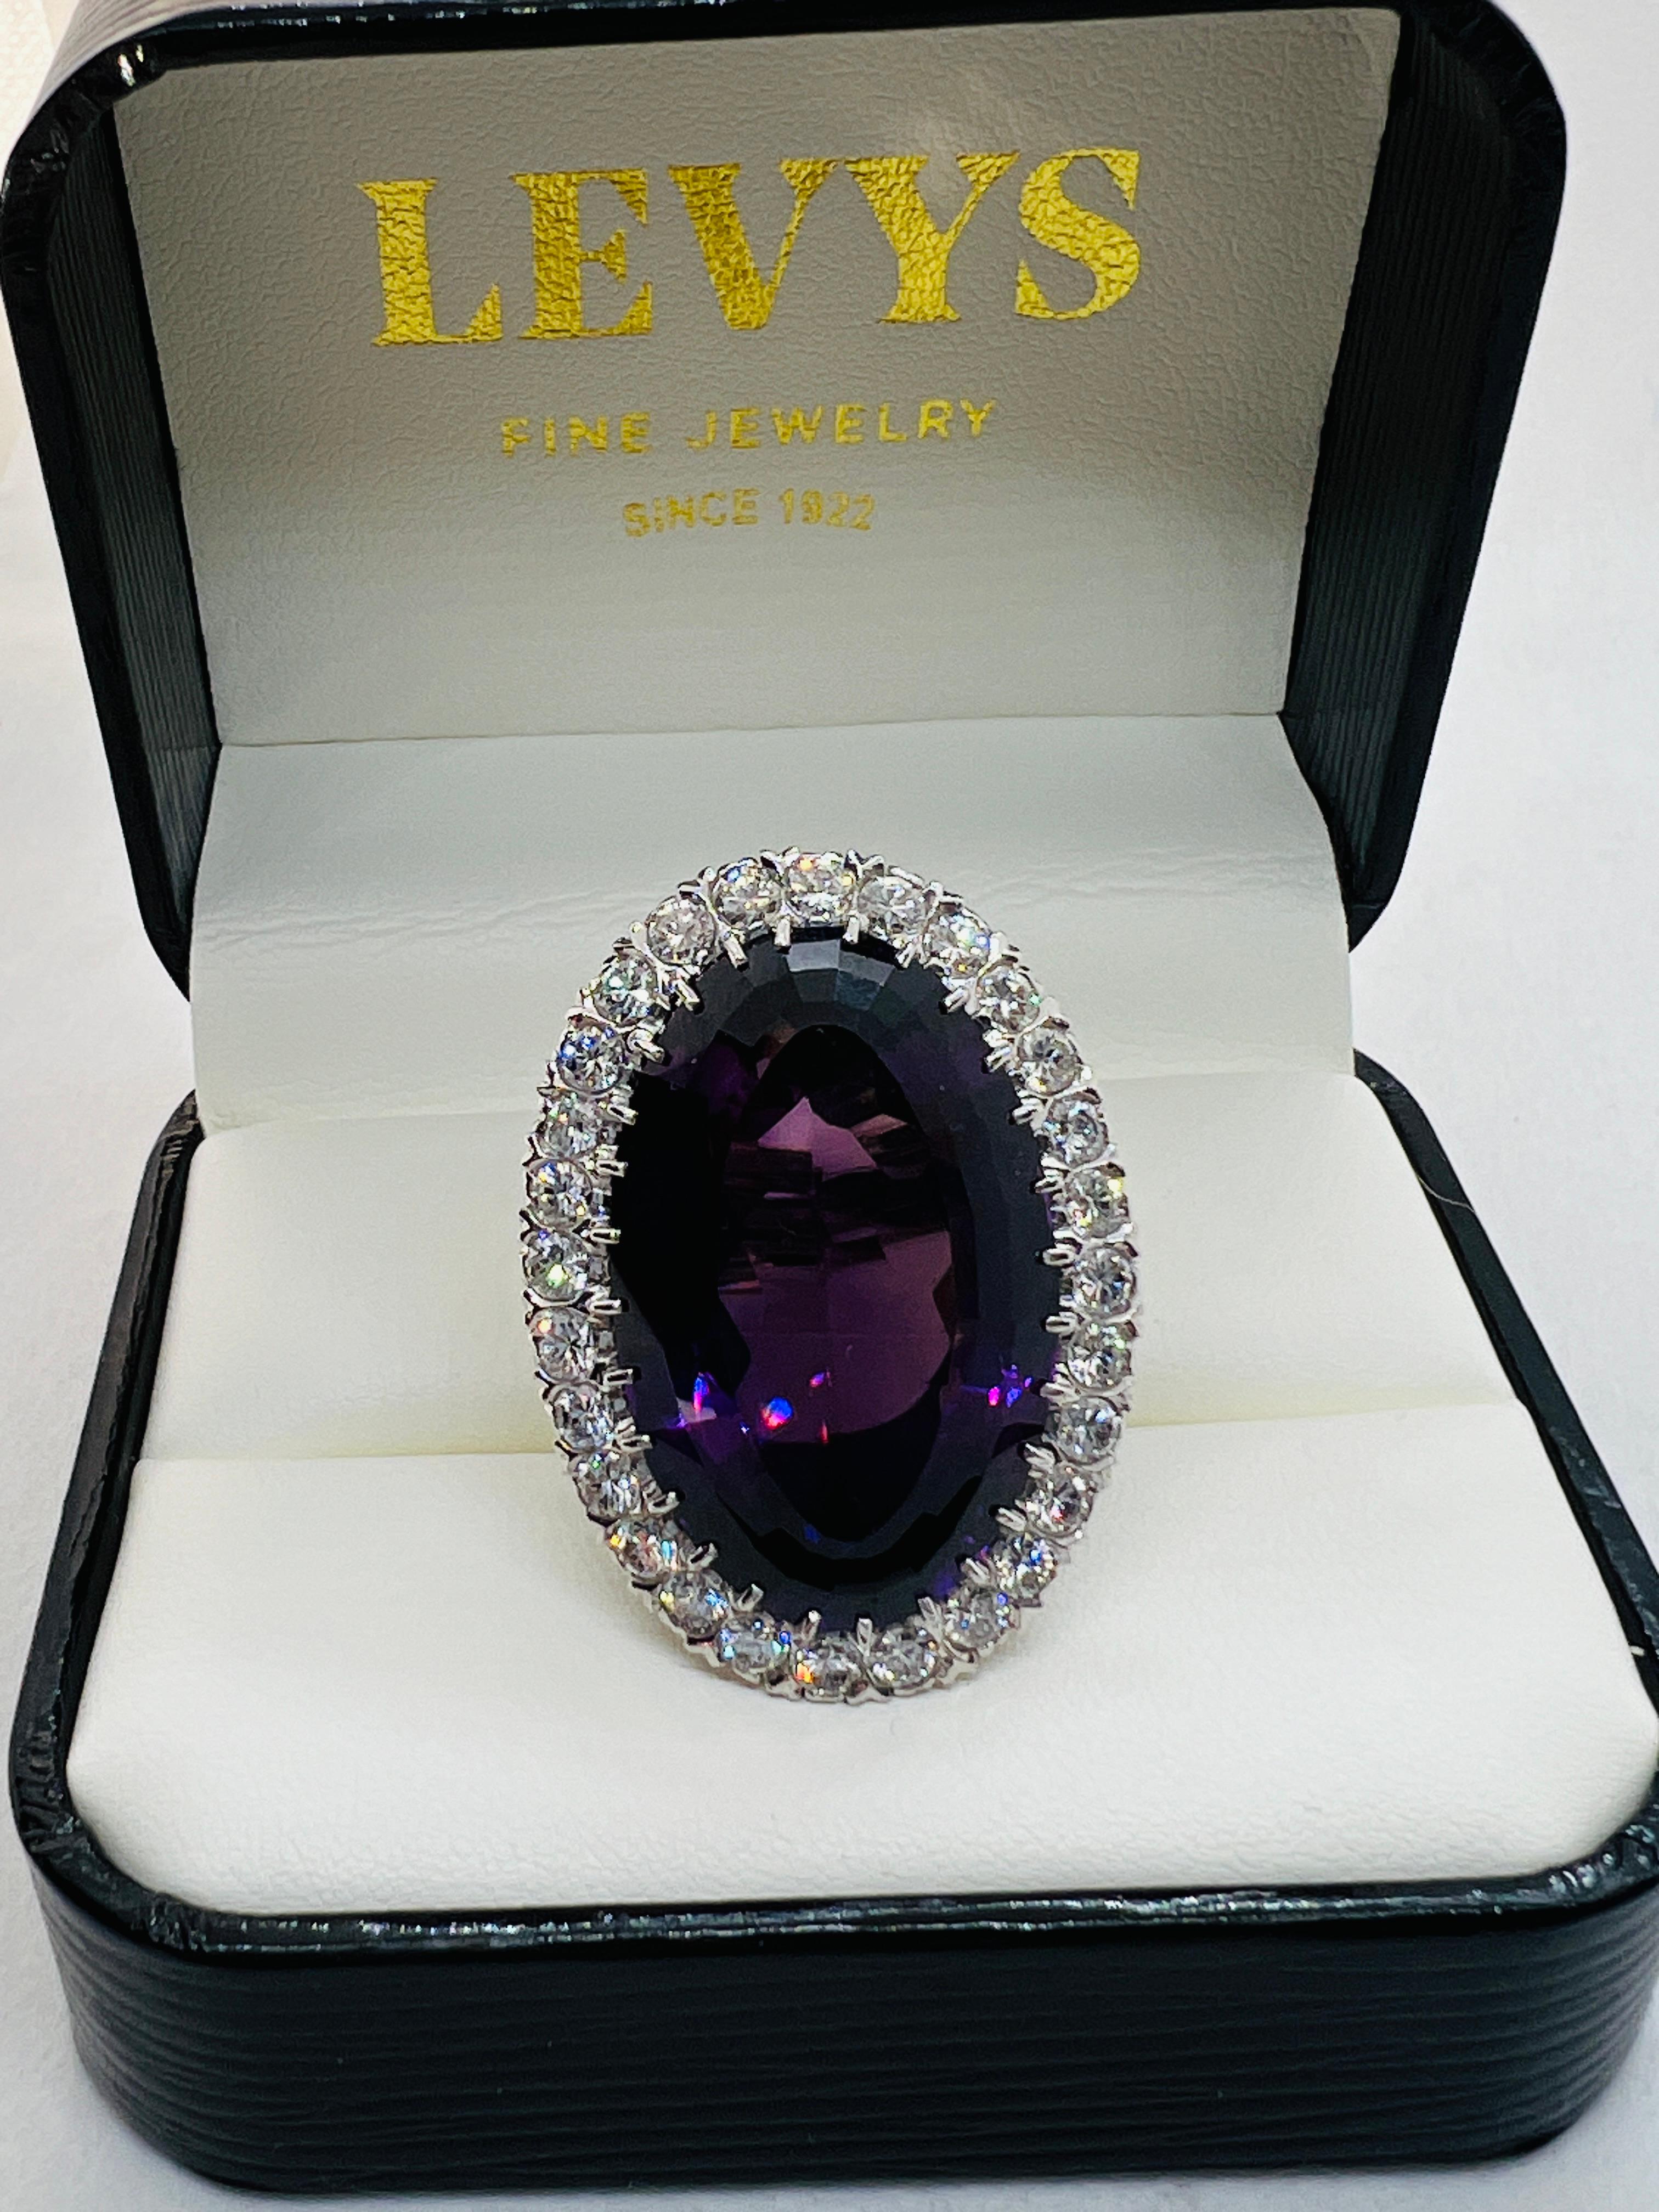 Platinum, Diamond and 40 Carat Oval Amethyst Ladies Cocktail Ring Size 5.75 In Excellent Condition For Sale In Birmingham, AL